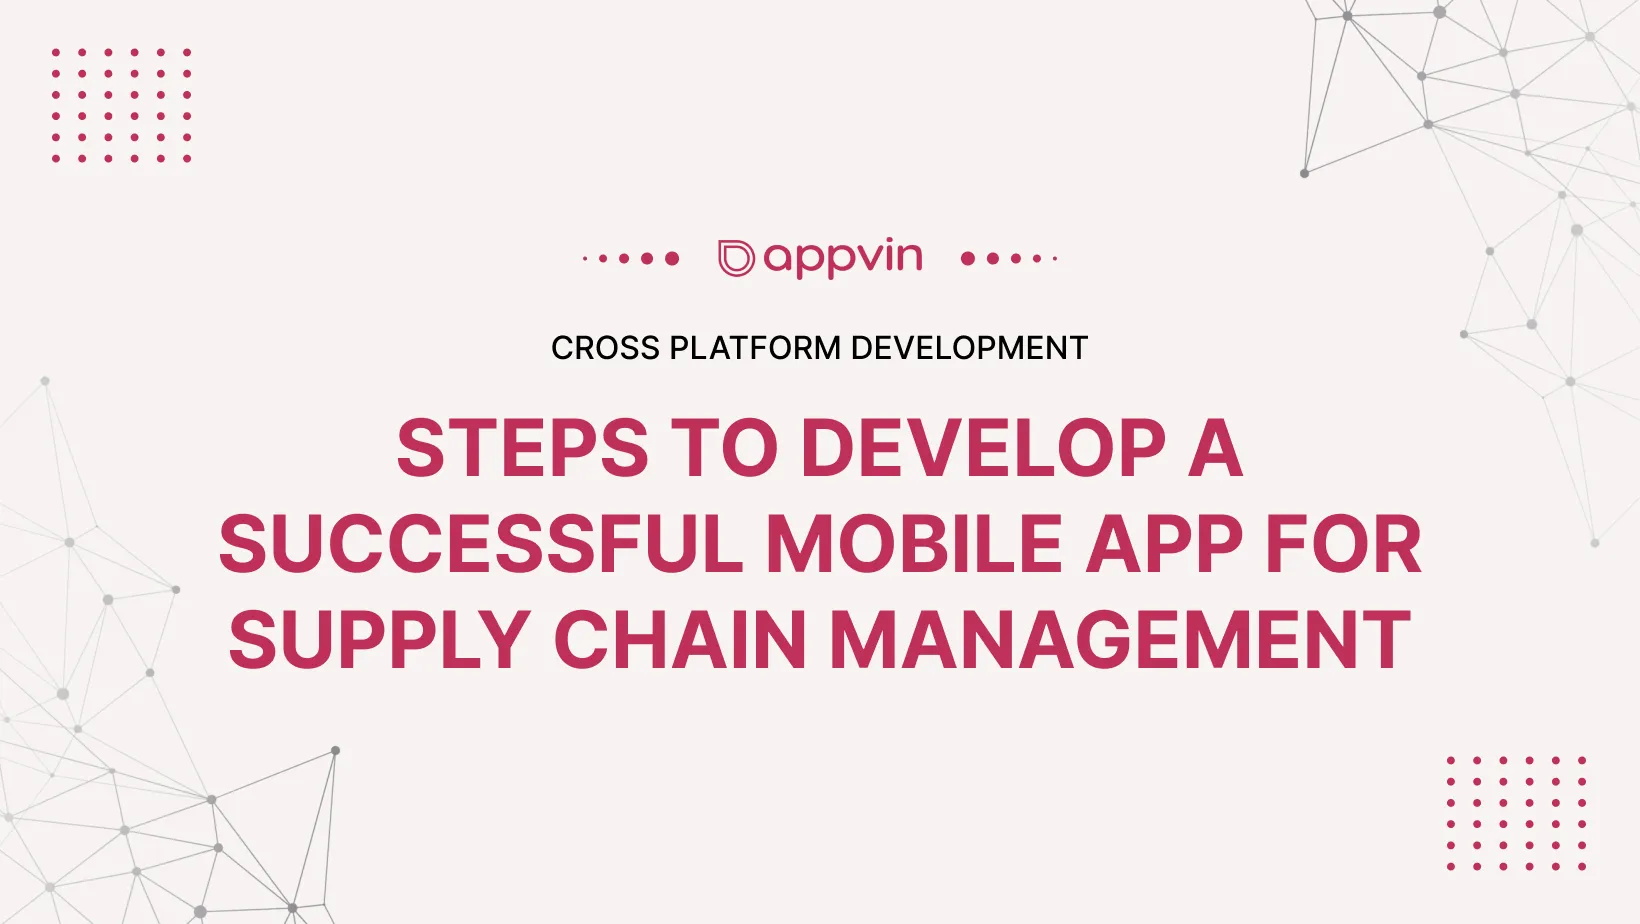 Steps to develop a successful mobile app for supply chain management 